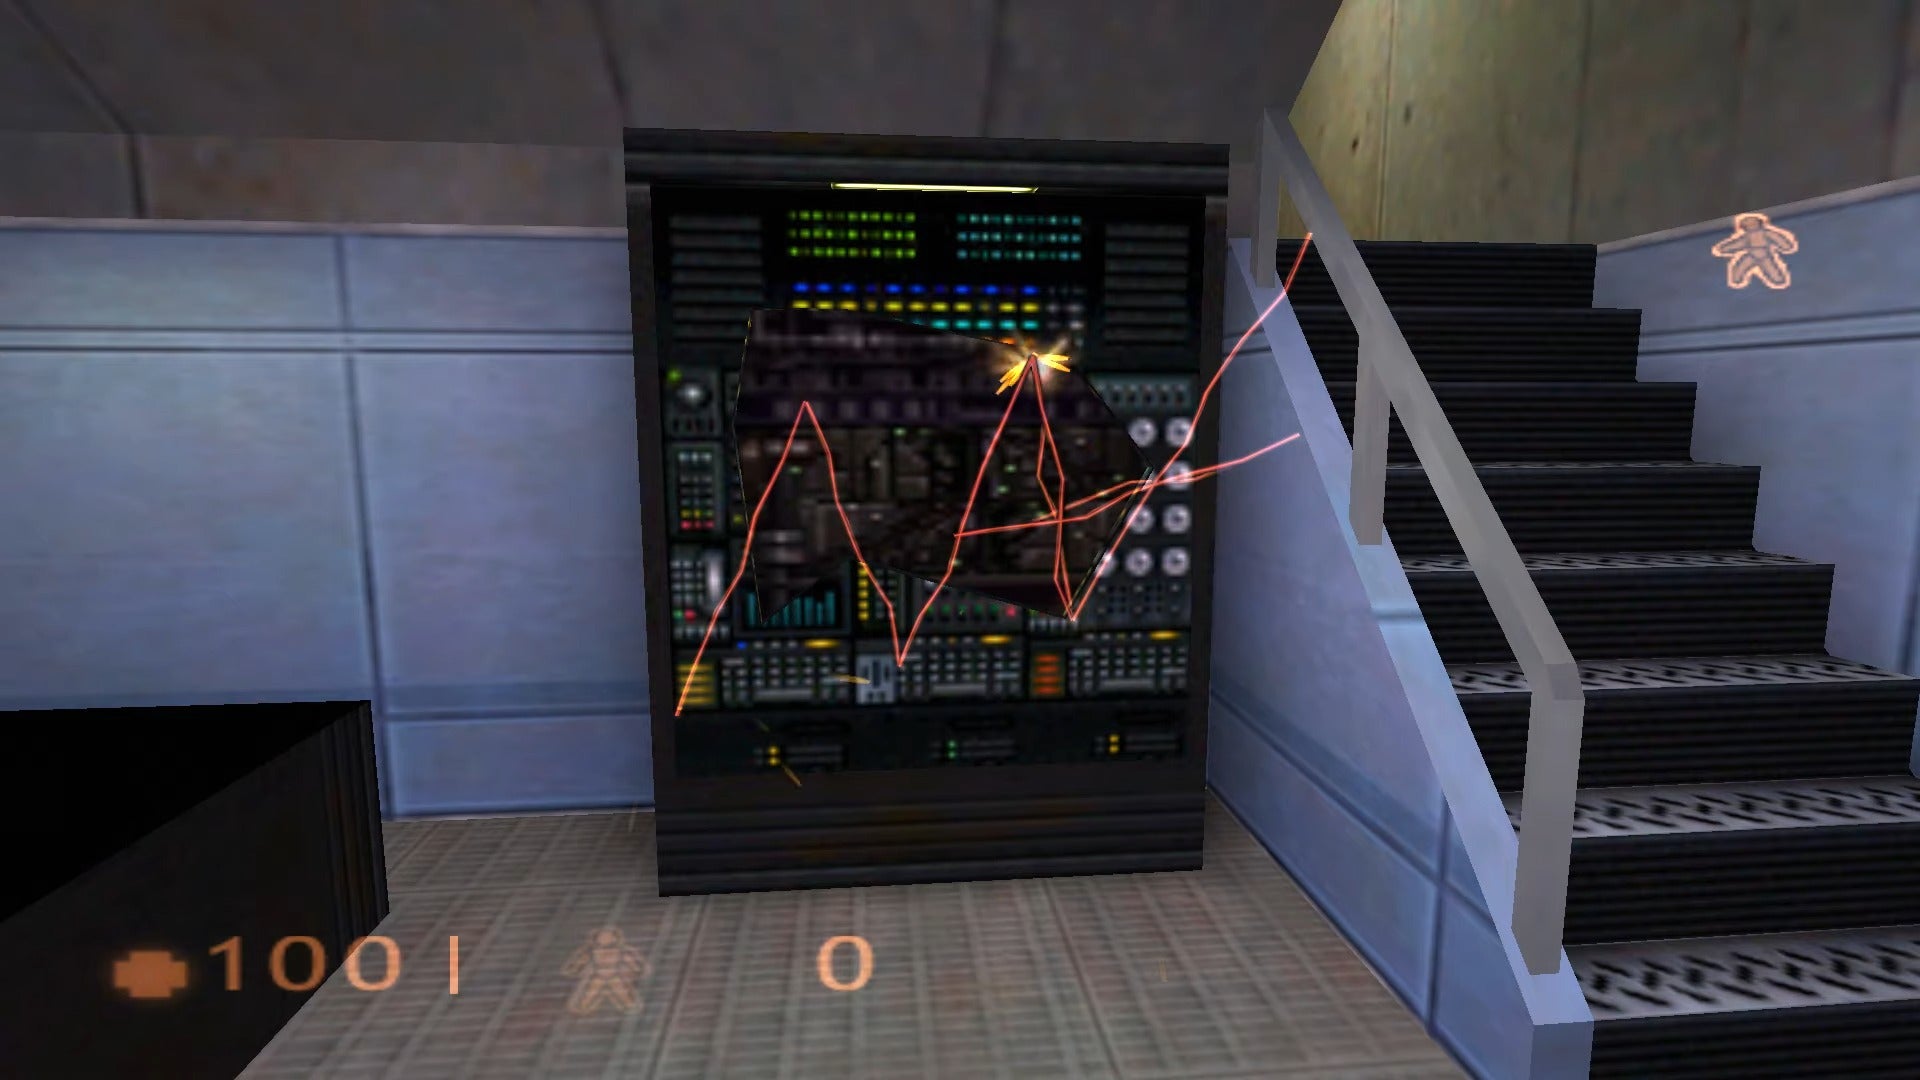 A Nearly 20-Year-Old Half-Life Easter Egg Was Just Found